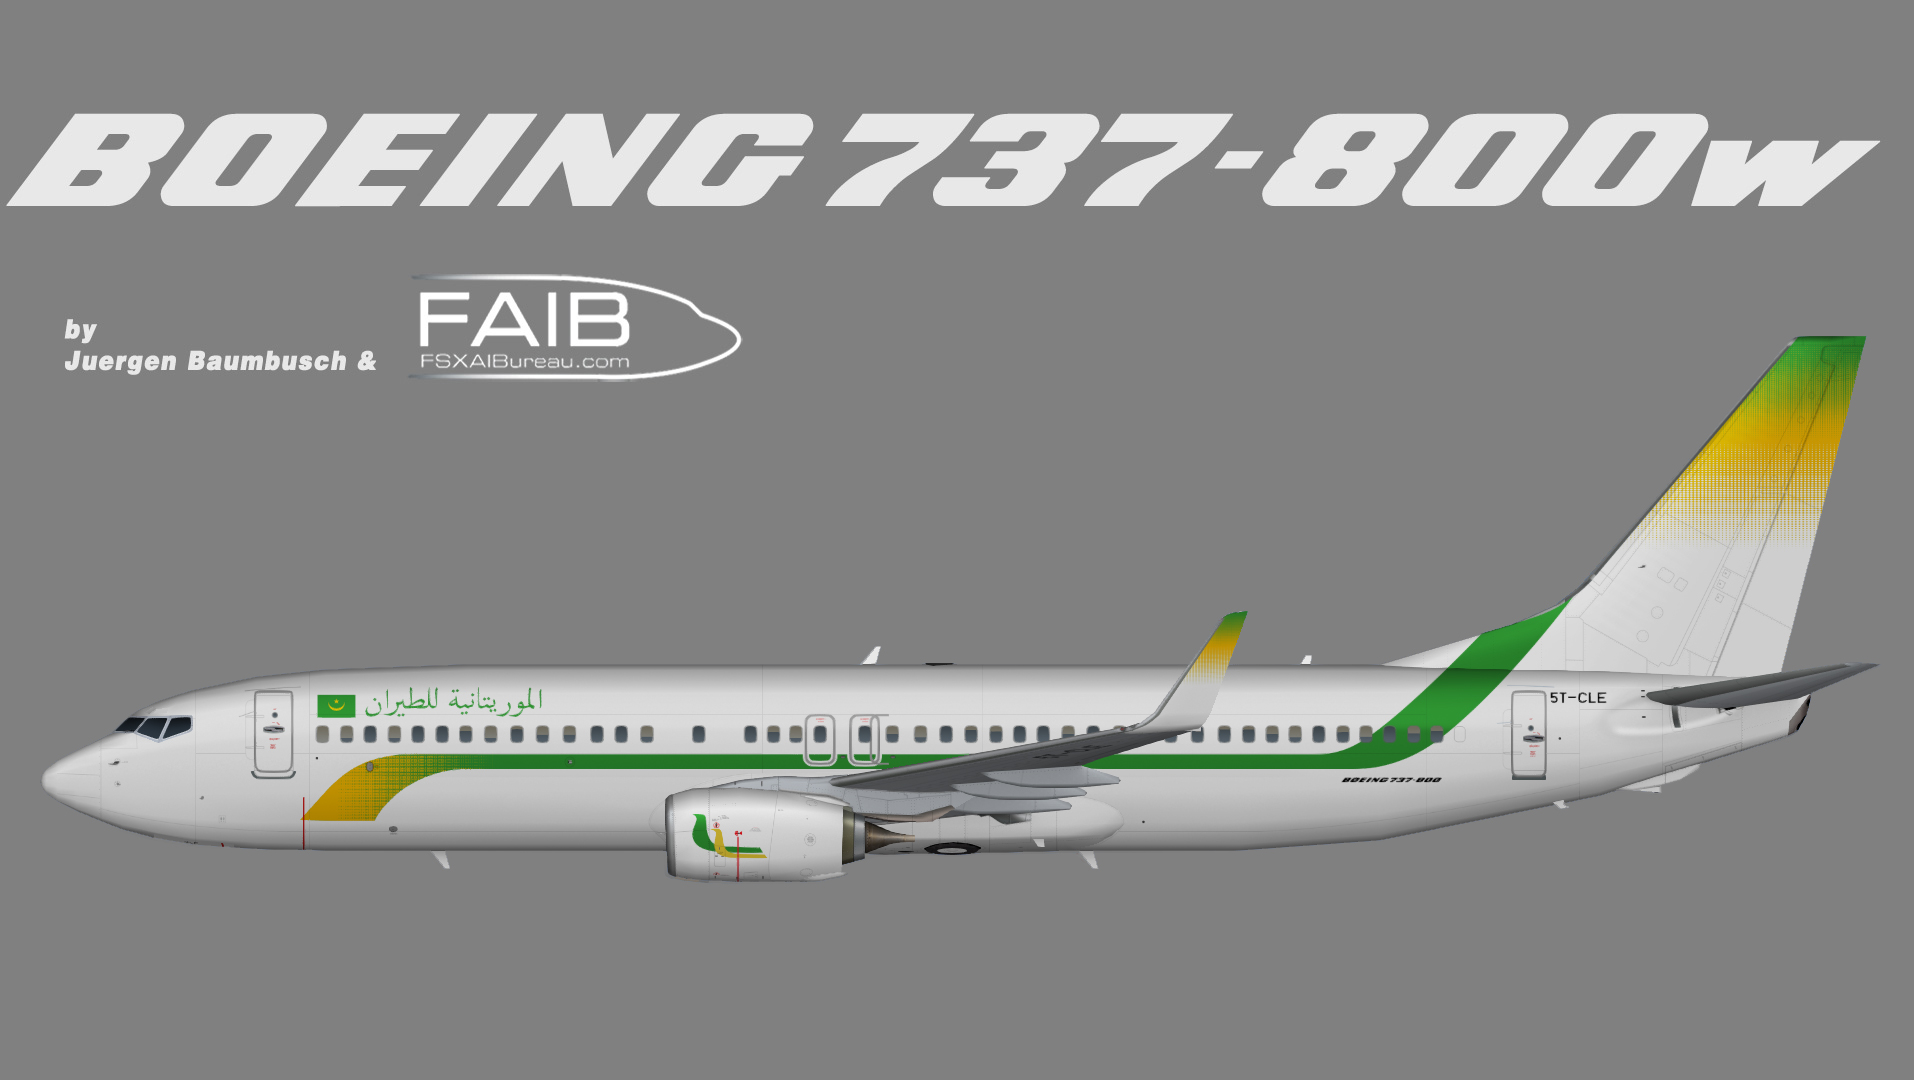 Mauritania Airlines Boeing 737-800w